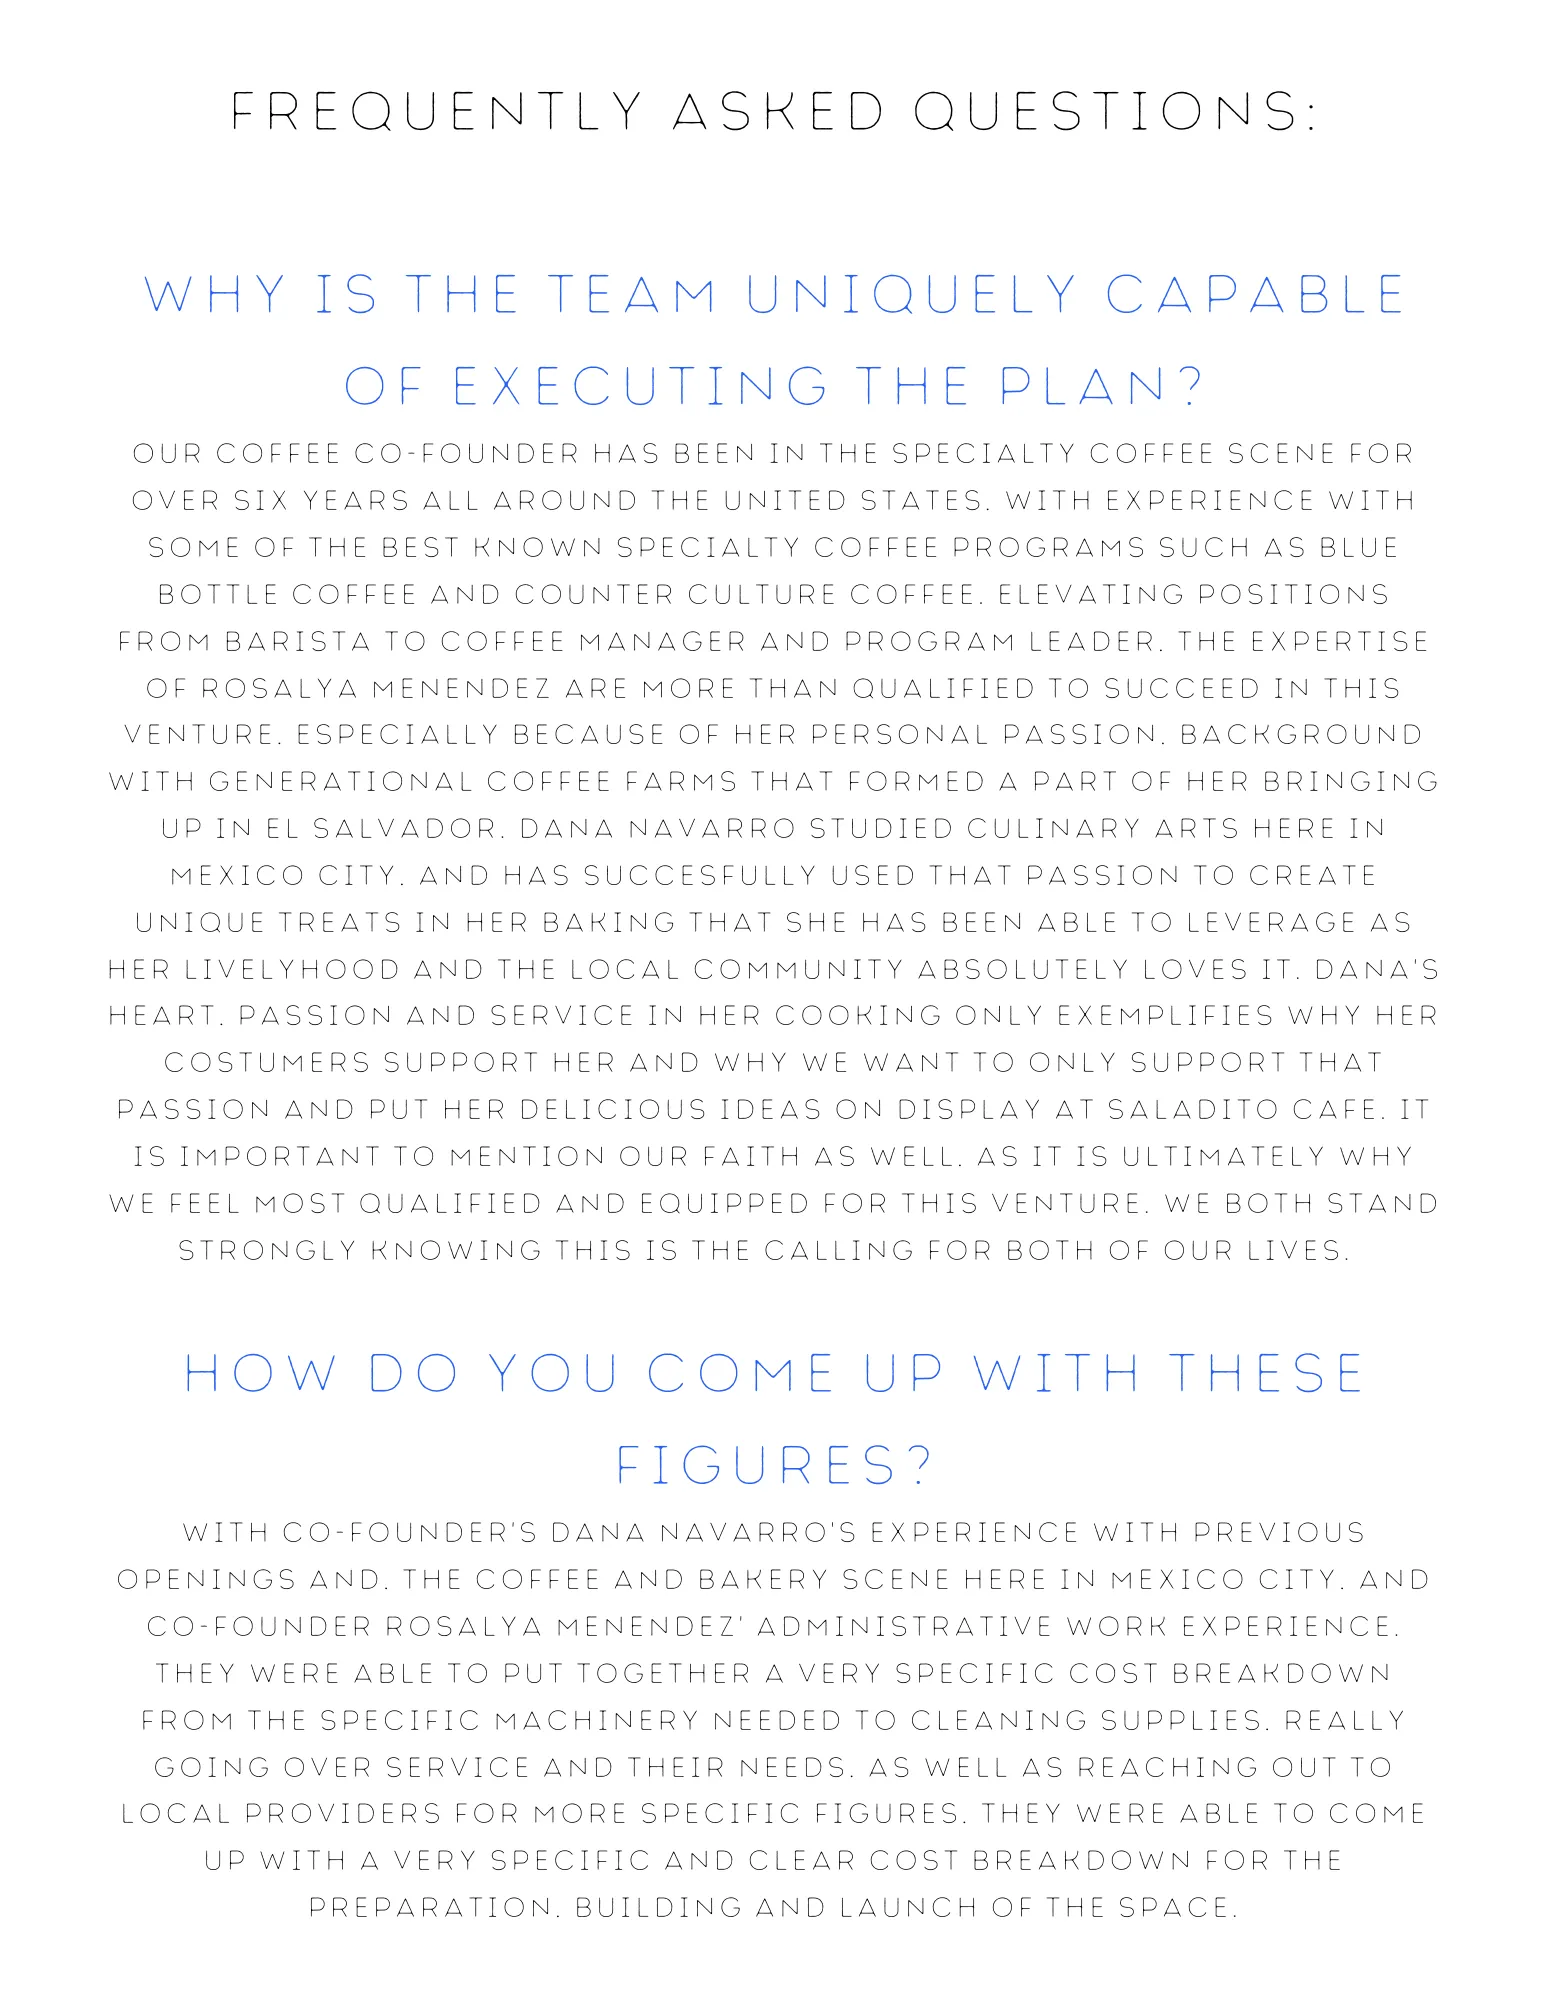 Why is the team uniquely capable of executing the plan? Our coffee co-founder has been in the specialty coffee scene for over six years all around the United States, with experience with some of the best known specialty coffee programs such as Blue Bottle Coffee and Counter Culture Coffee. Elevating positions from barista to Coffee Manager and Program Leader, the expertise of Rosalya Menendez are more than qualified to succeed in this venture, especially because of her personal passion, background with gene